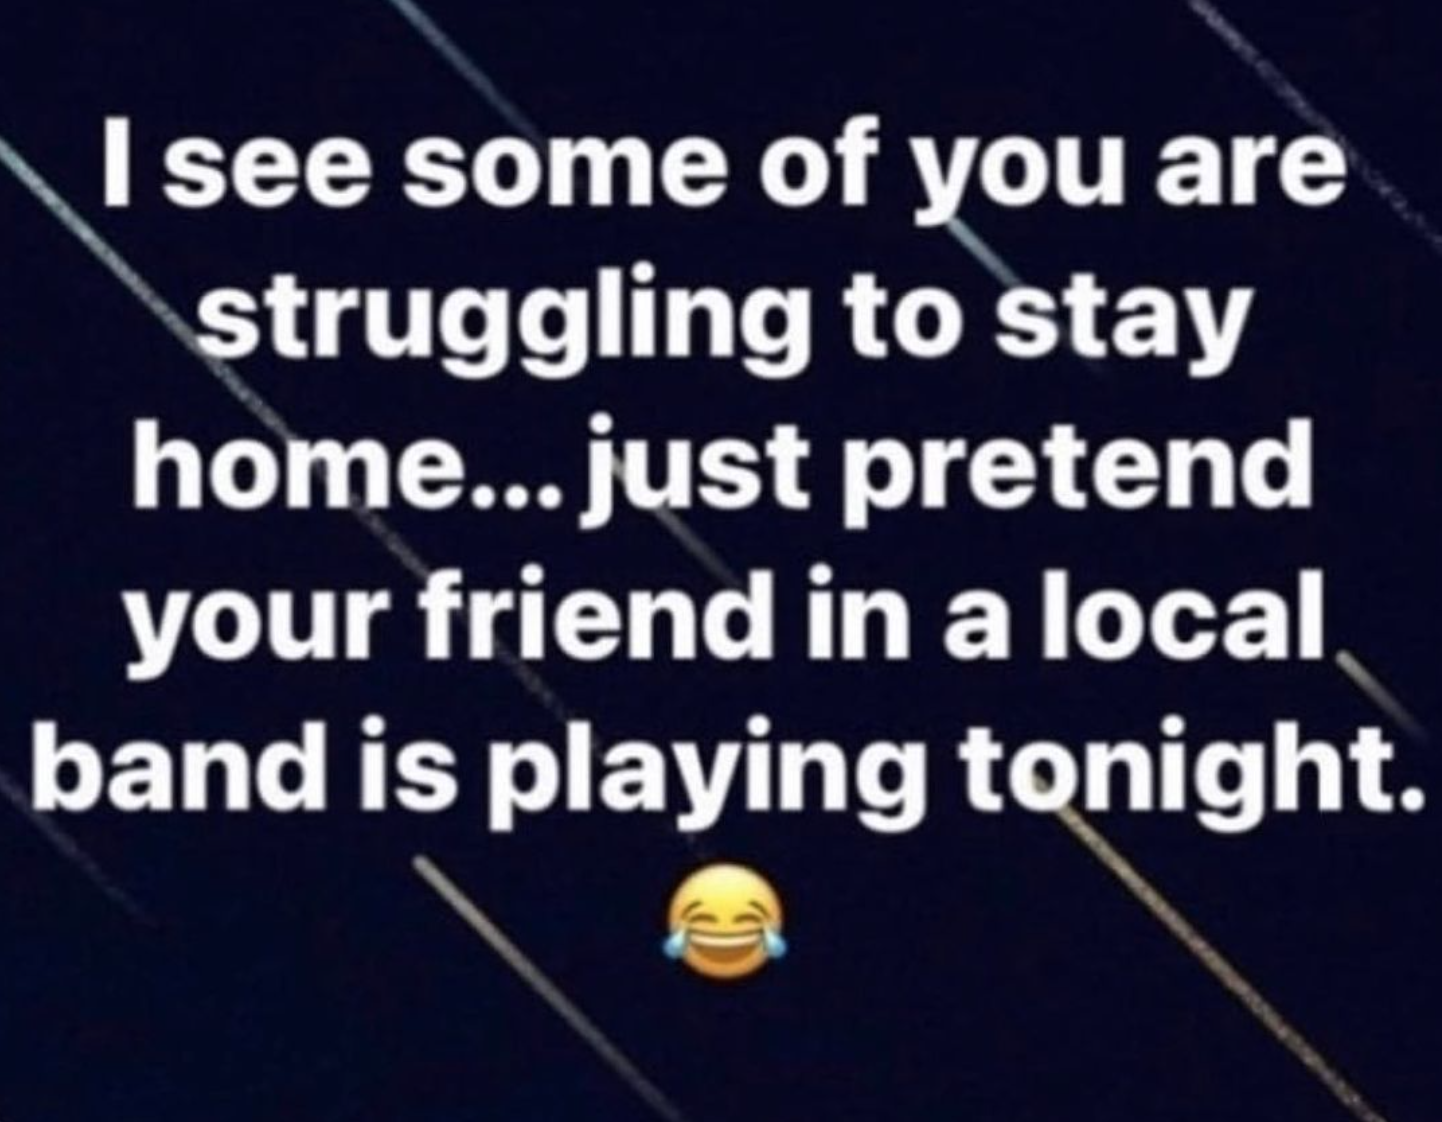 atmosphere - I see some of you are struggling to stay home... just pretend your friend in a local. band is playing tonight.